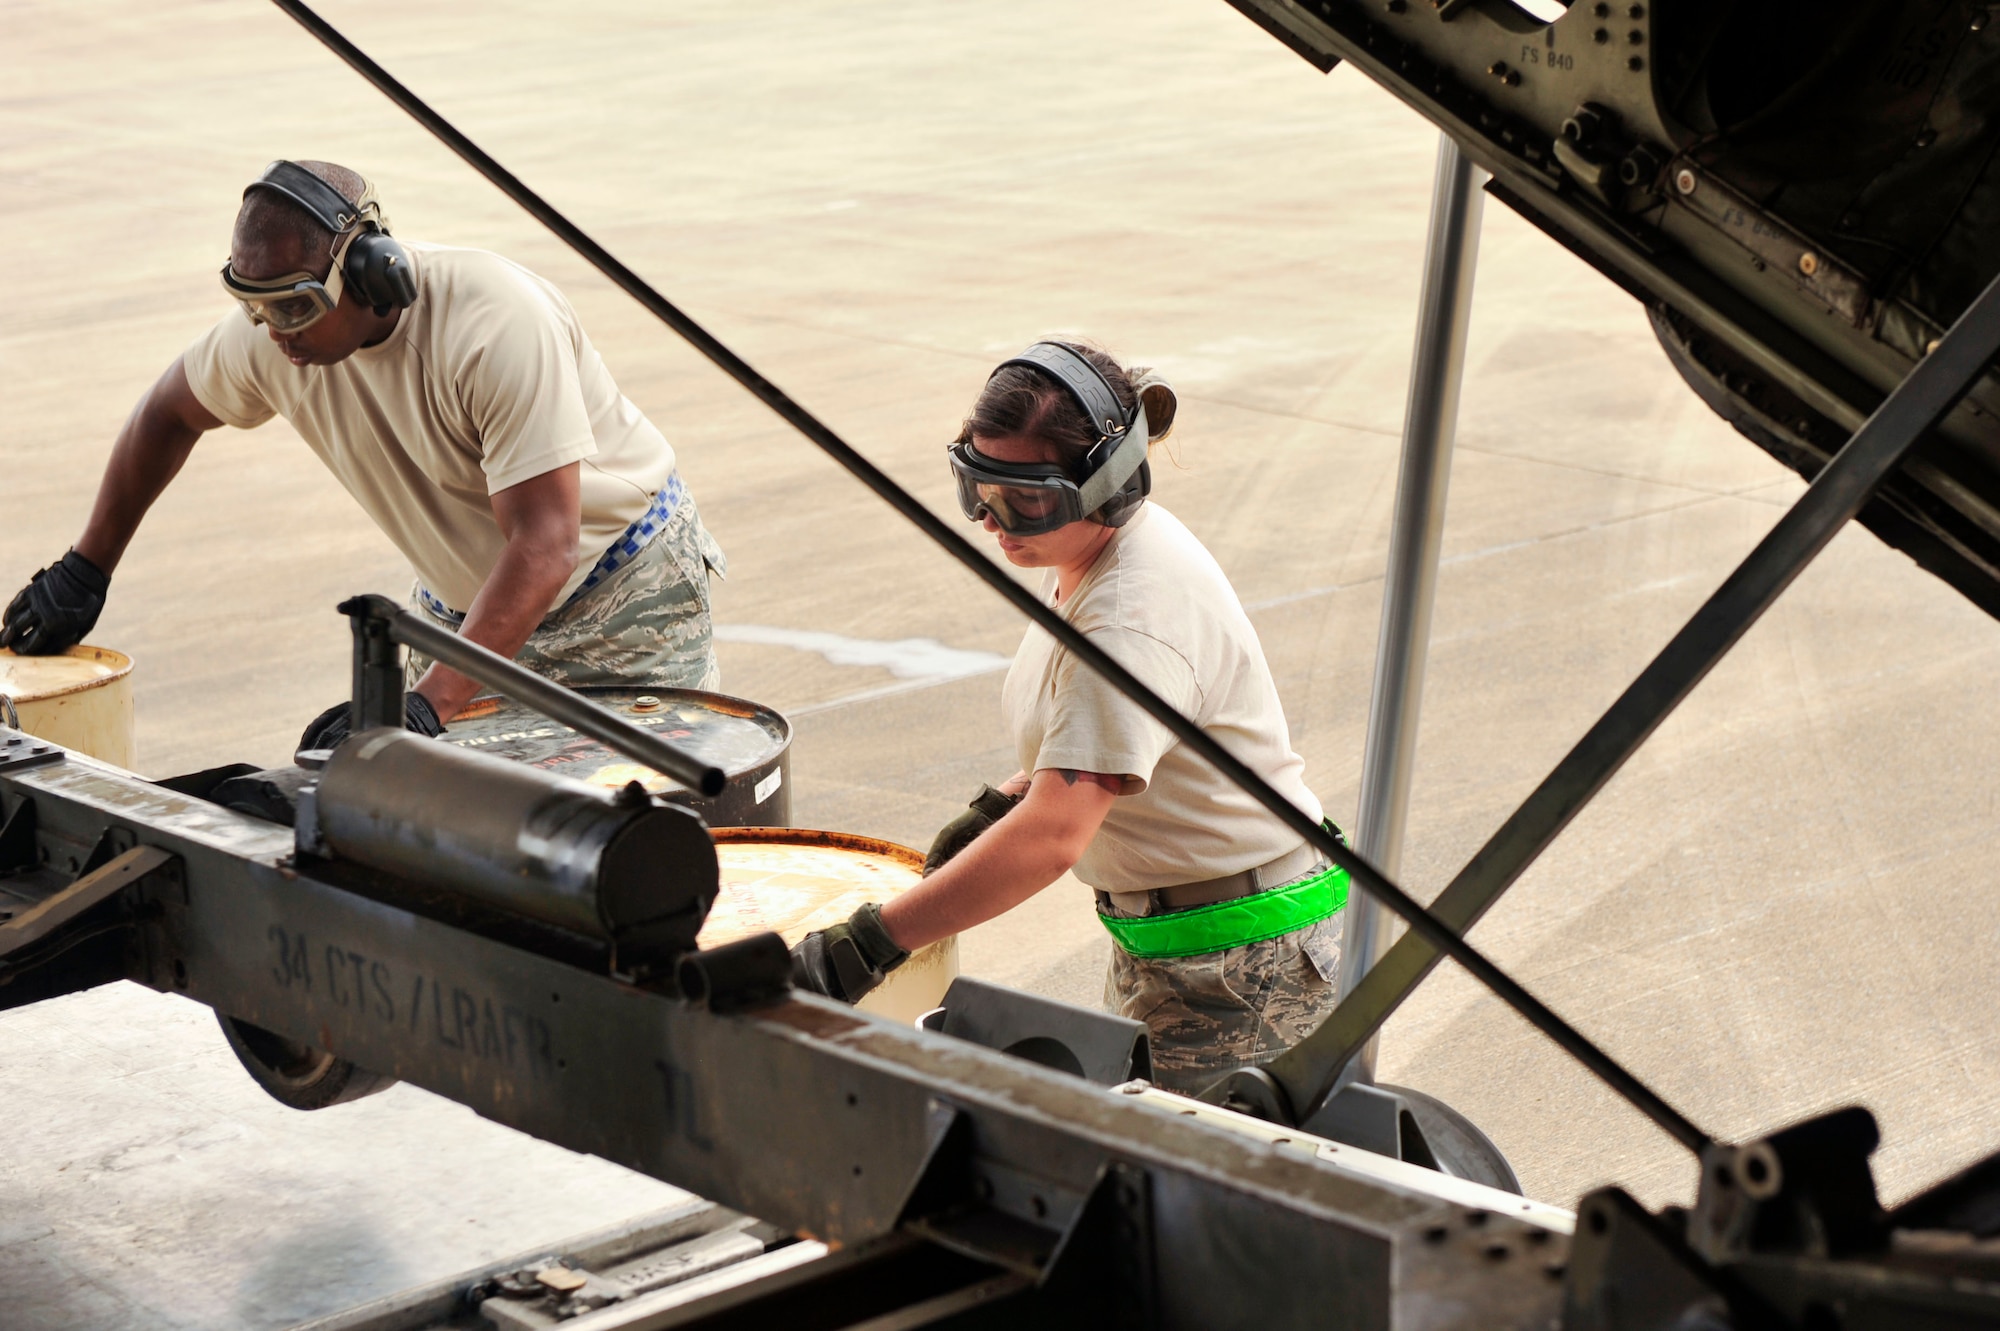 Airmen from the 305th Aerial Port Squadron at Joint Base McGuire-Dix-Lakehurst, New Jersey, load barrels under a trailer carrying a 1,430-lb. C-130 engine stand trailer unit Aug. 26, 2016, at a landing zone in Alexandria, Louisiana. The barrels are used to support the pallet as the C-130 slowly pulls forward to release the equipment. (U.S. Air Force photo by Staff Sgt. Regina Edwards)